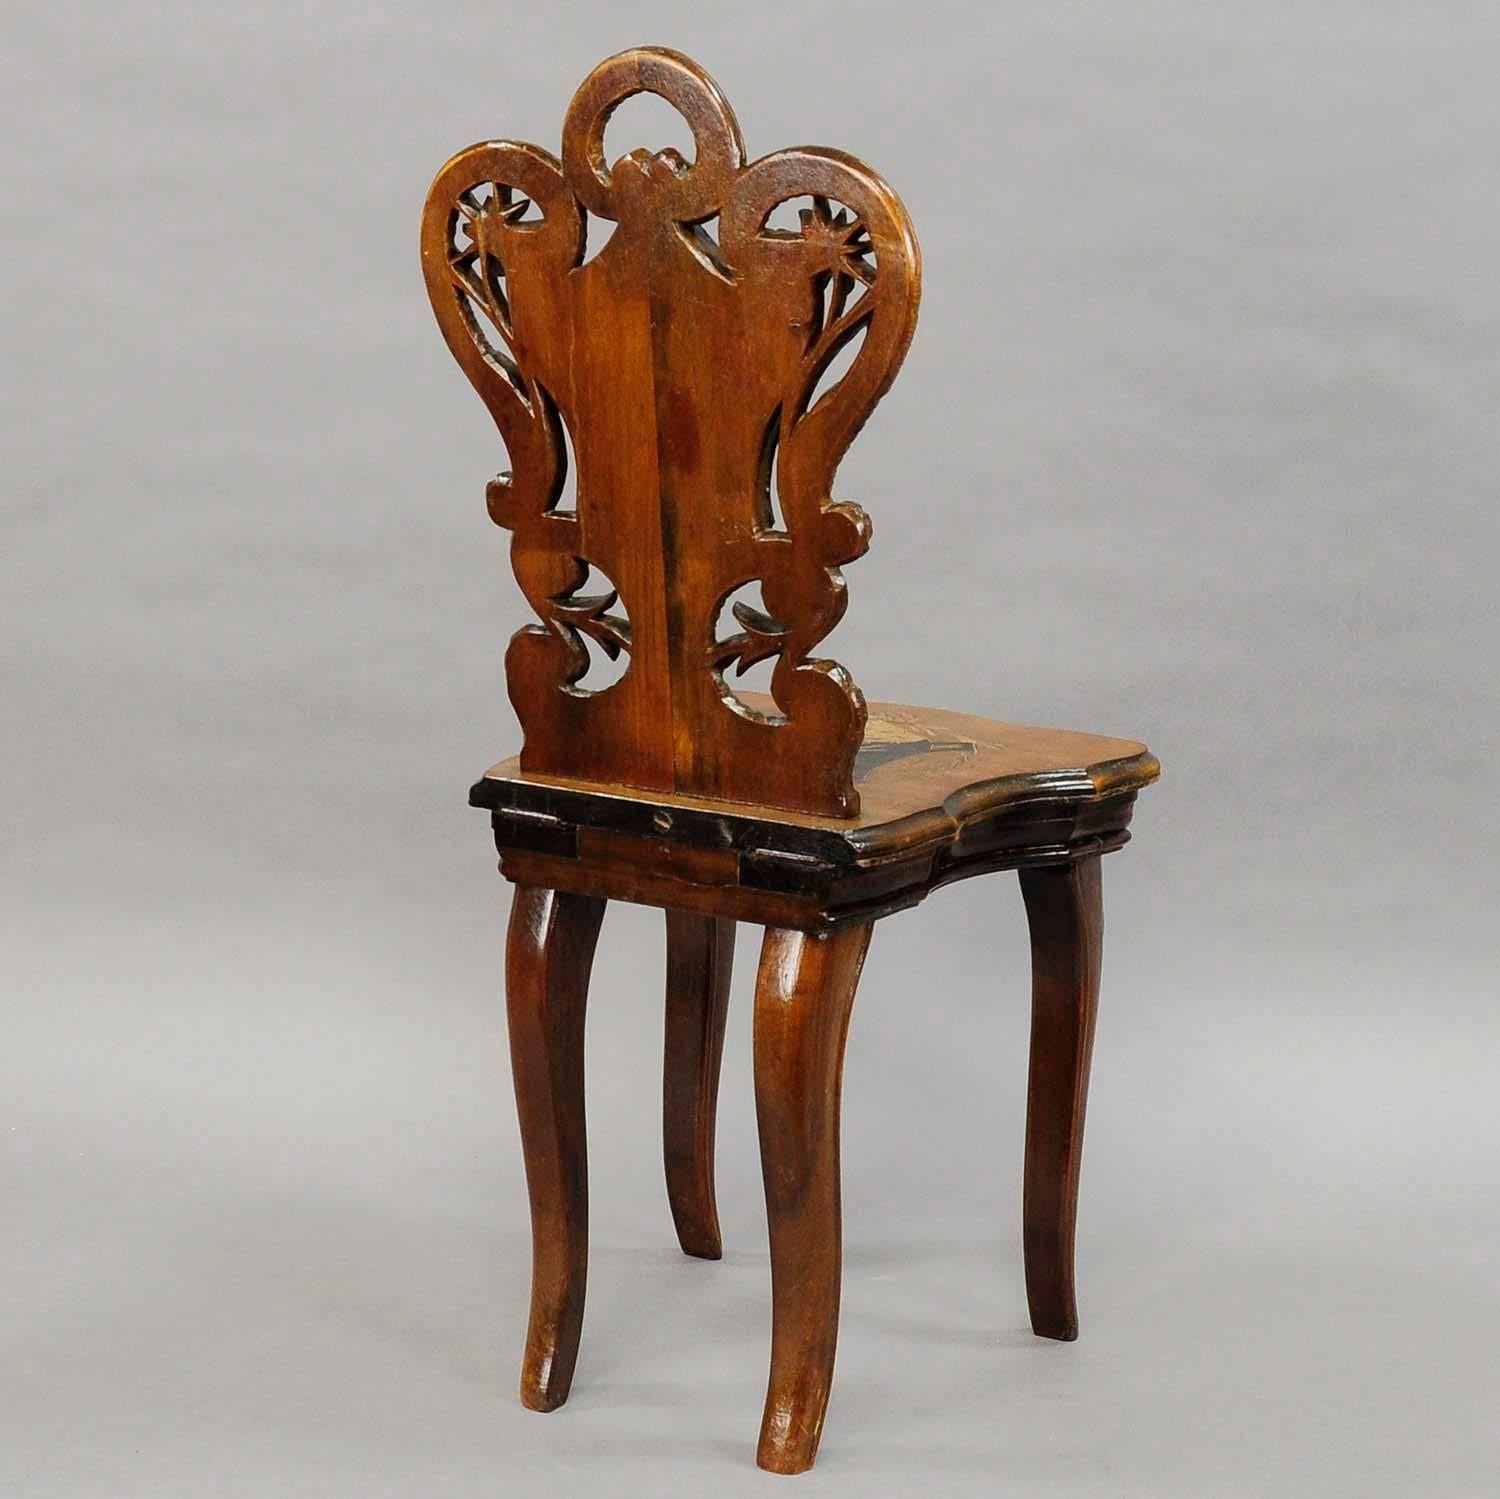 Black Forest Carved and Inlaid Walnut Children Chair with Musical Work, Swiss, 1900